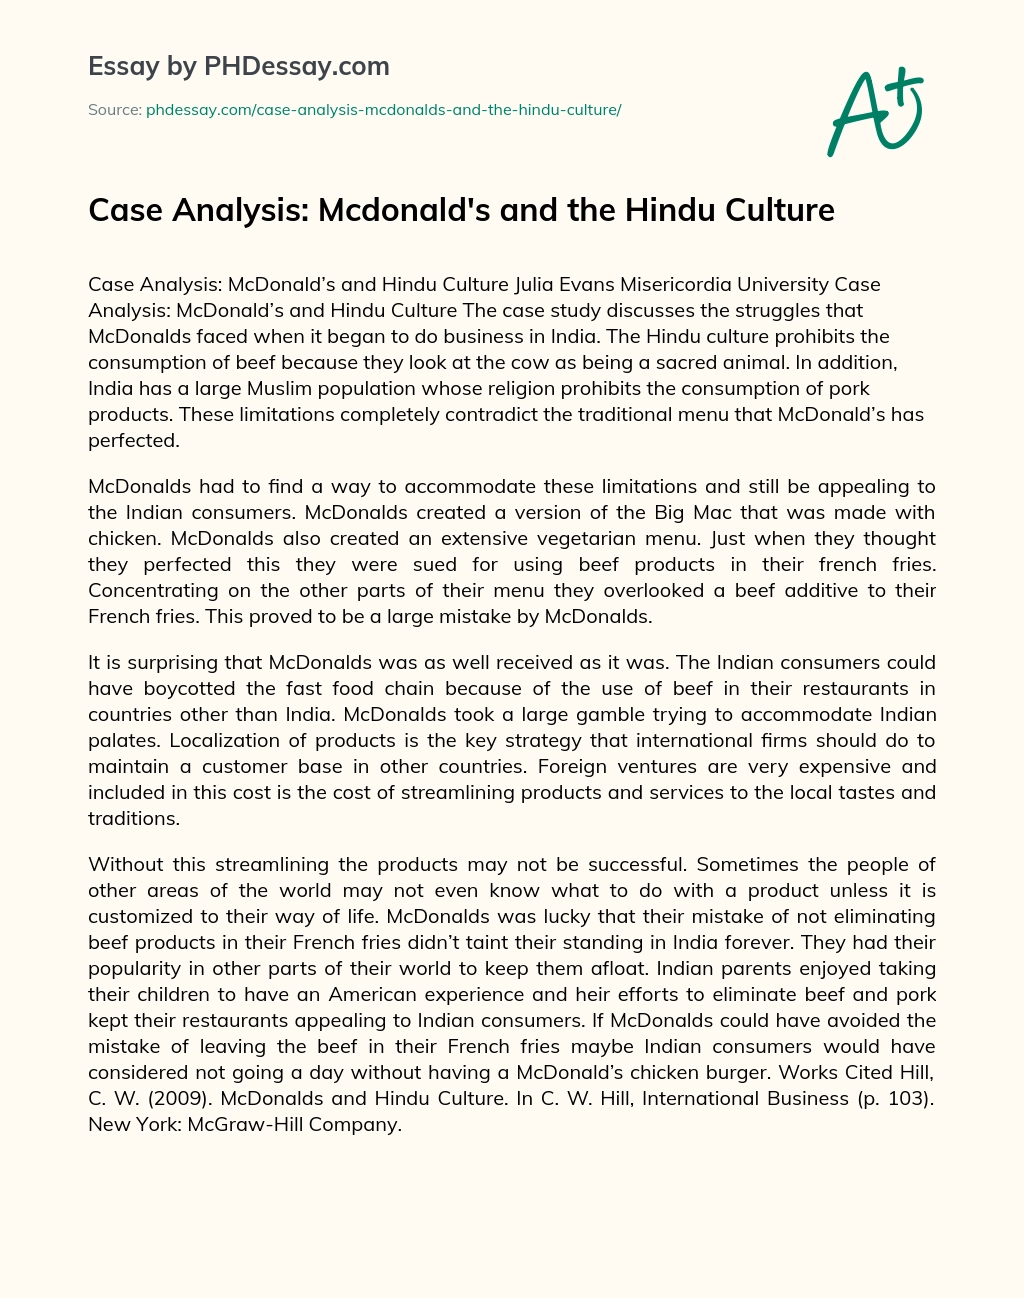 Case Analysis: Mcdonald’s and the Hindu Culture essay